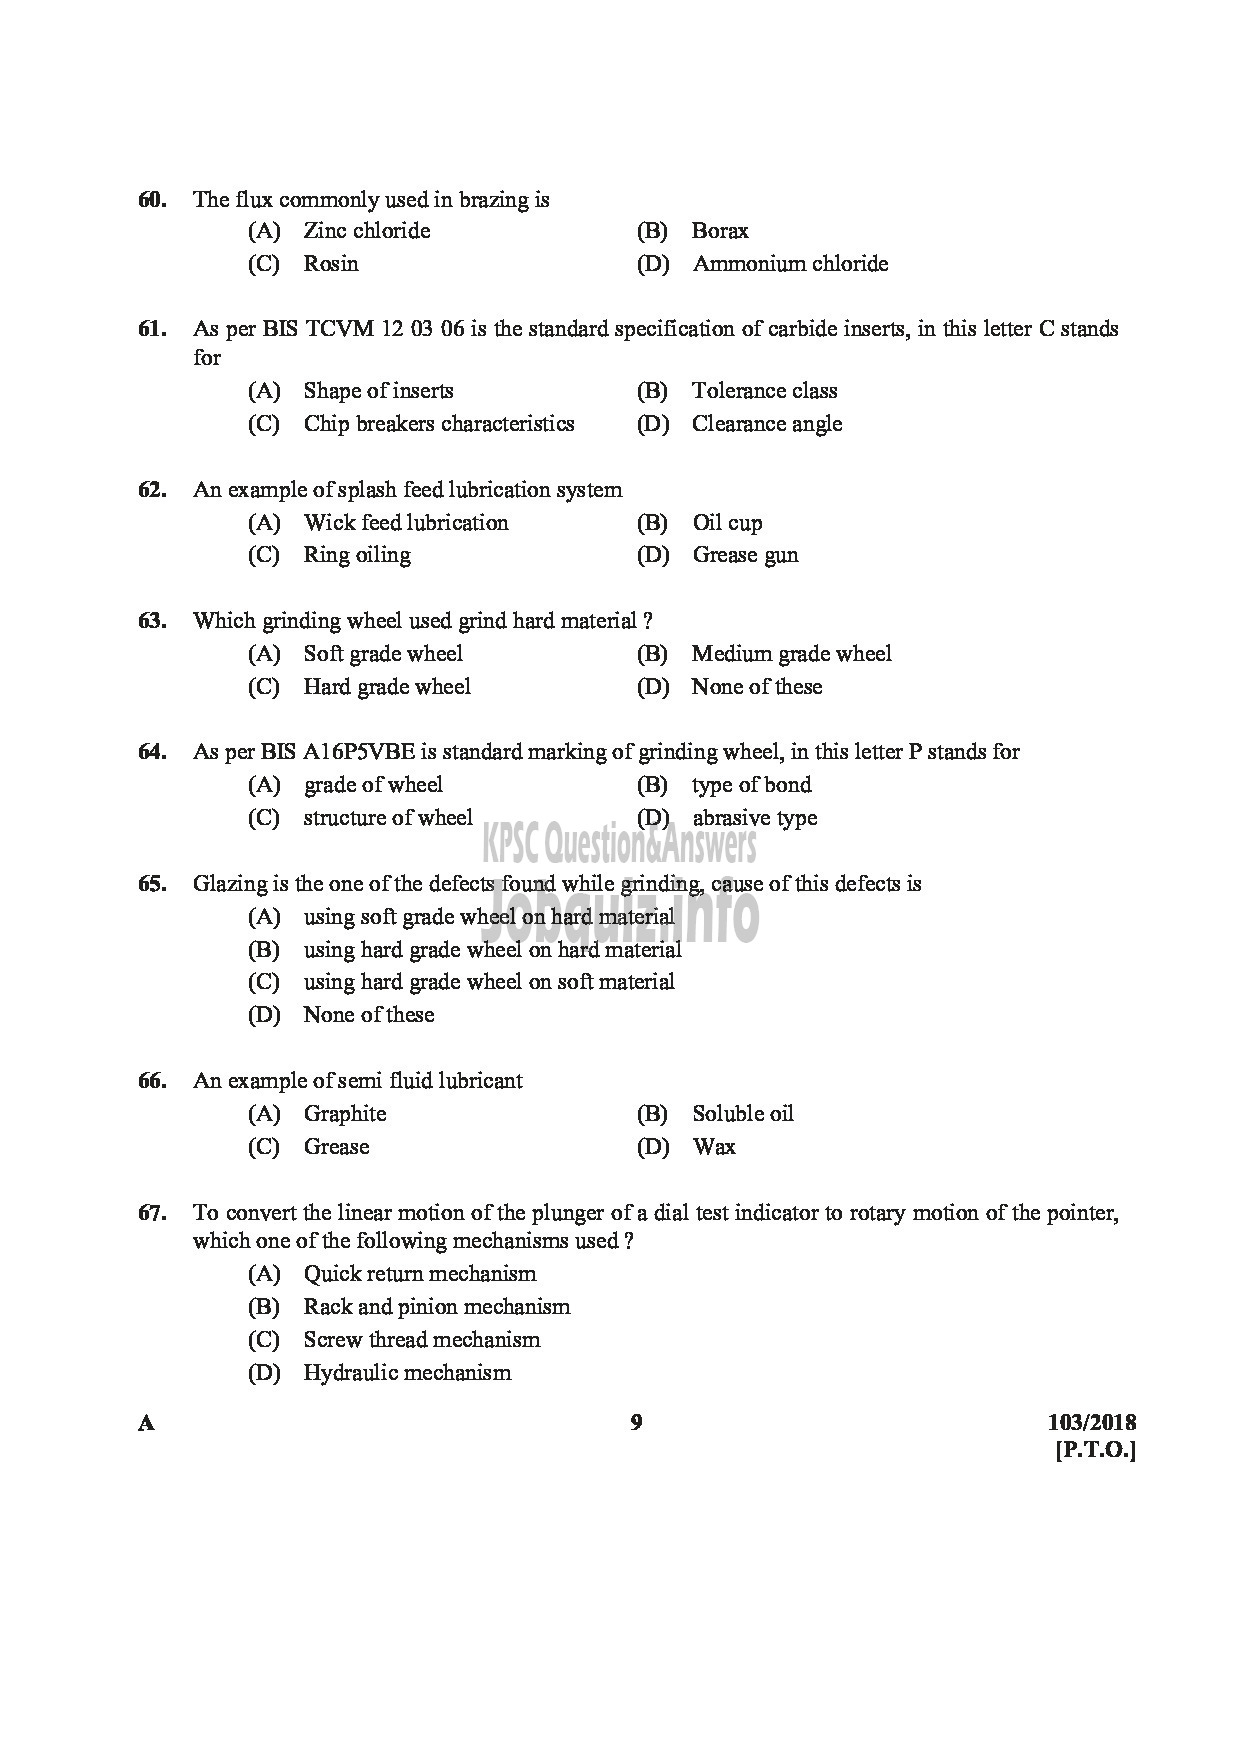 Kerala PSC Question Paper - JUNIOR INSTRUCTOR TURNOR INDUSTRIAL TRAINING DEPARTMENT ENGLISH -9